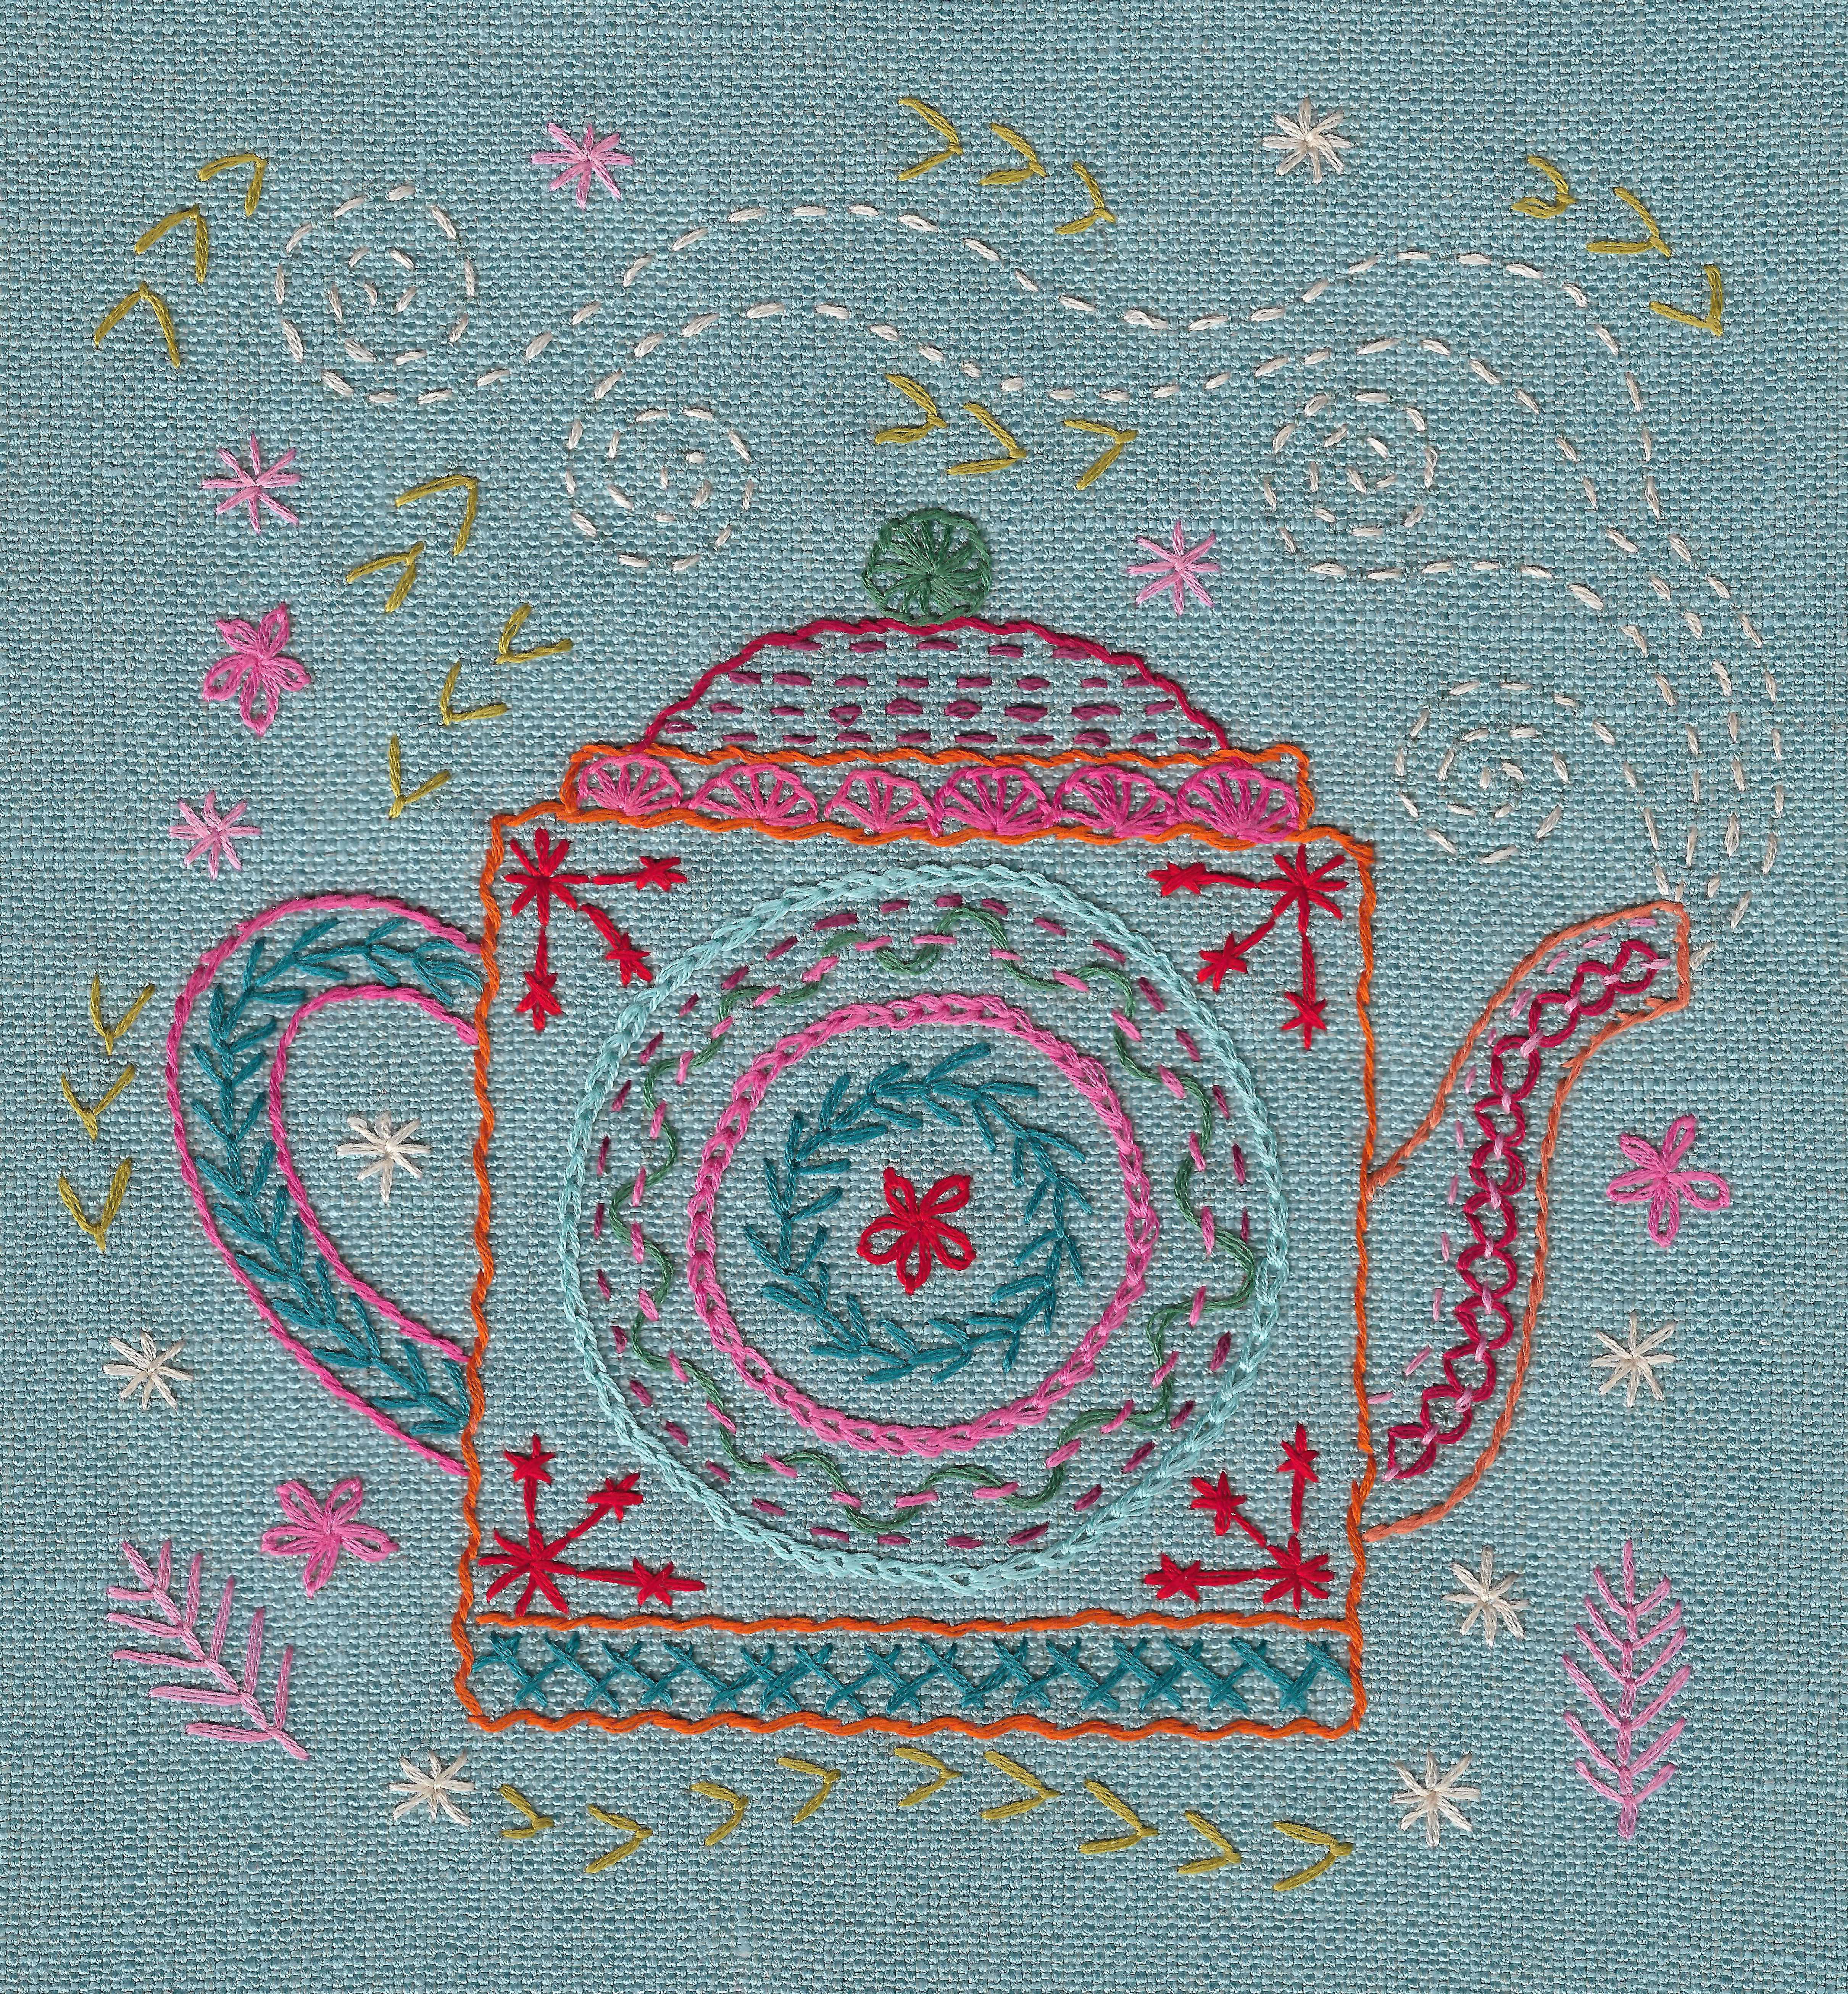 Iron On Transfer Patterns For Embroidery Teapot Iron On Transfer Embroidery Pattern